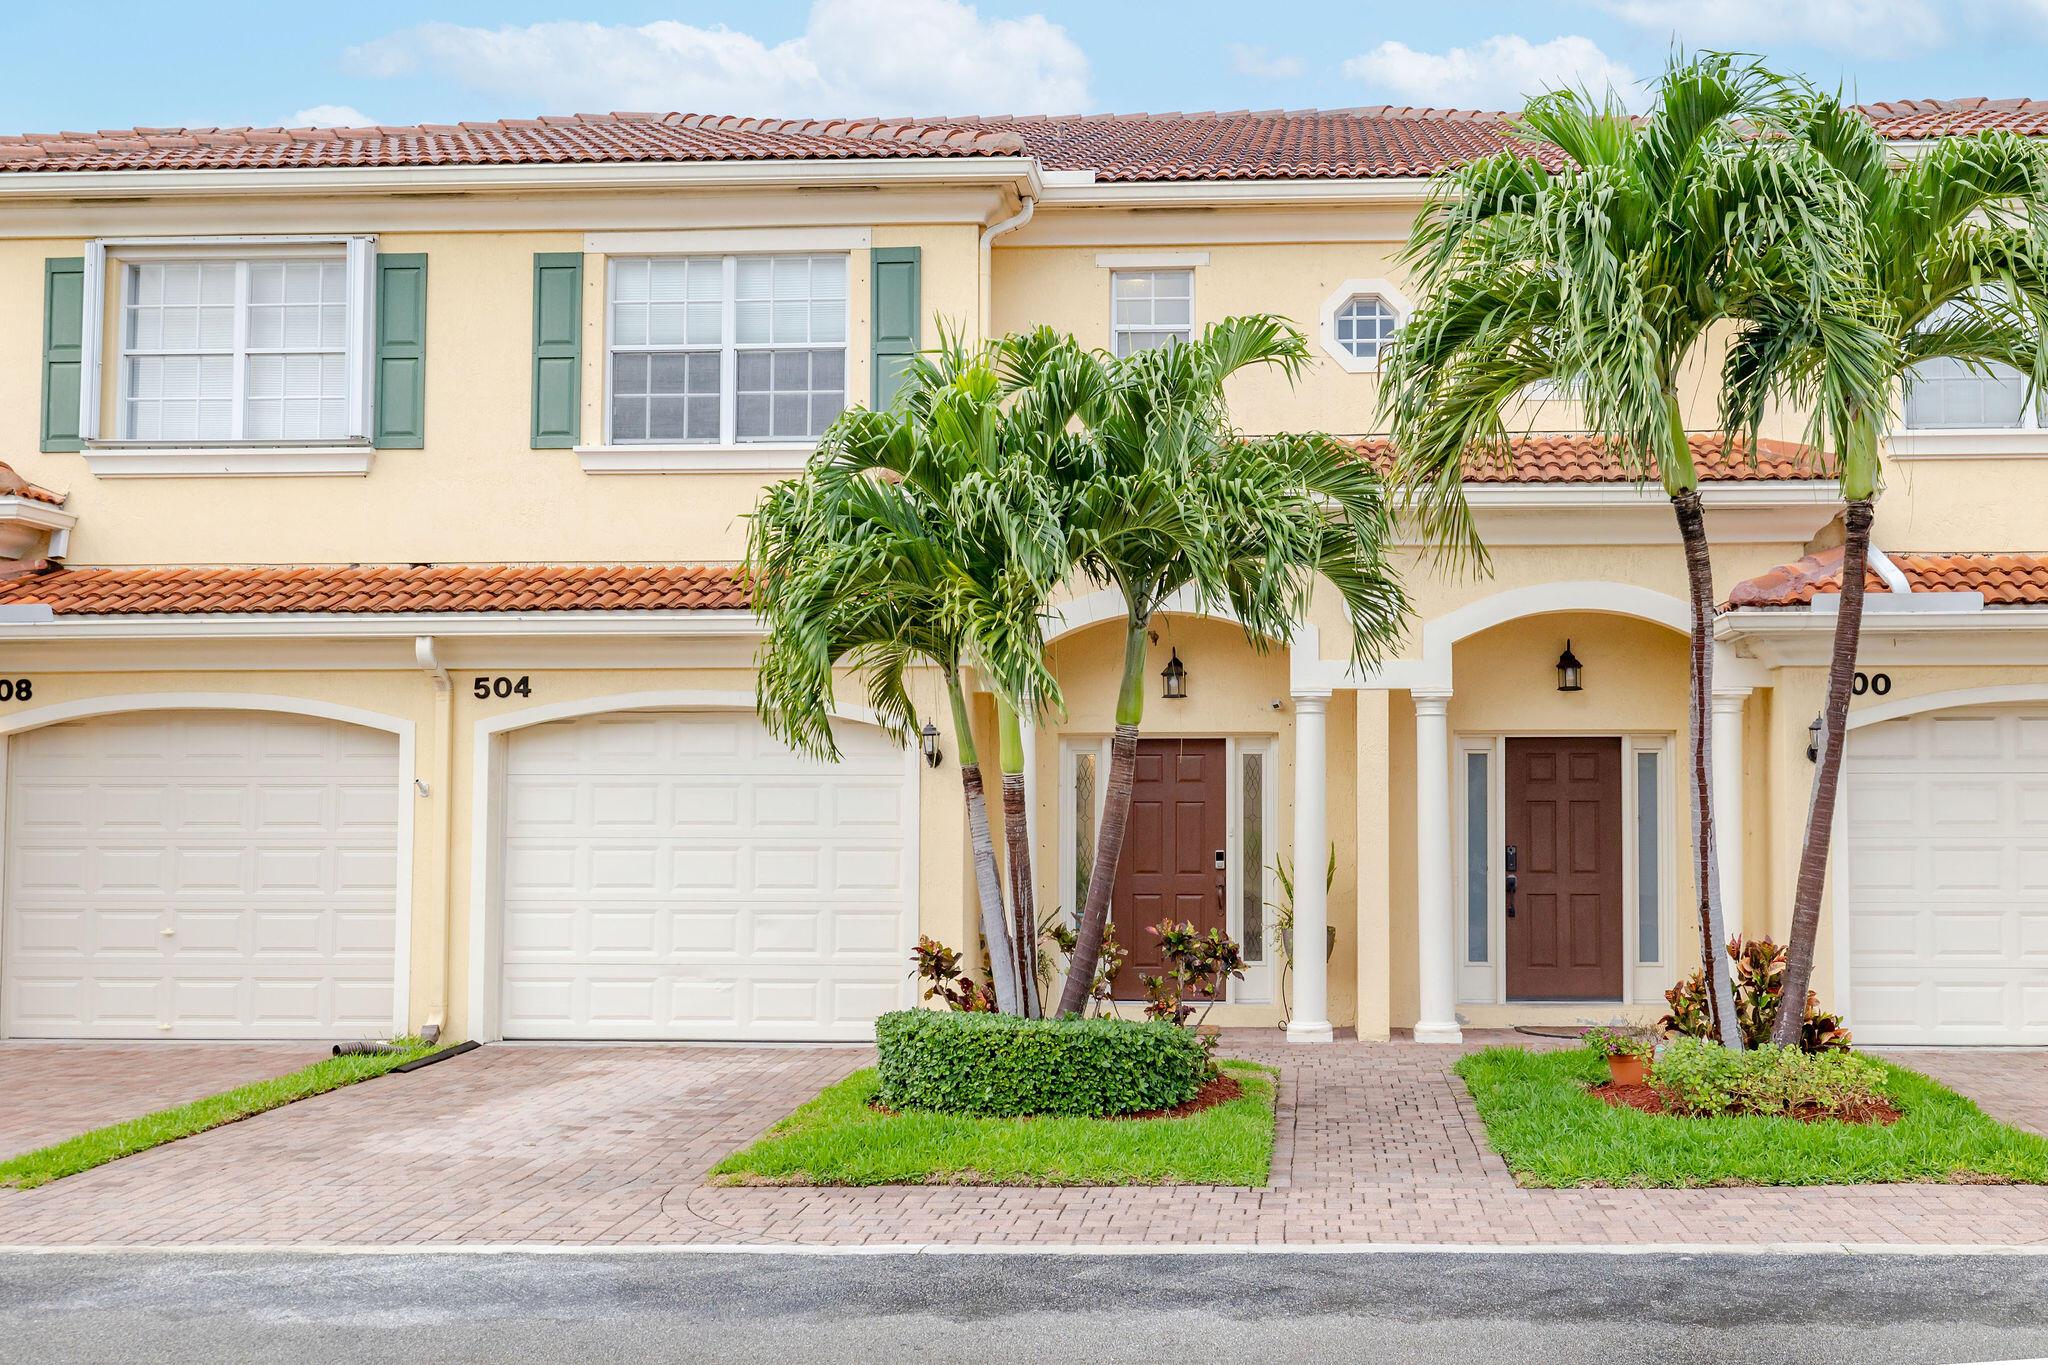 Welcome Home to Marbella Villas ~ A Gated Small Enclave Community in Beautiful north Palm Beach! AC UBNIT 2023 | KITCHEN APPLIANCES 2023| WASHER AND DRYER 2023! This home has an additional room that can be turned into a 3rd bedroom or use as an office or den! The Large Kitchen has ample cabinet space and opens to the Dining Room and Family Room wich allows for a Great Open Concept for entertaining. The Master Bedroom Suite has a private Bath and 2 walk in closets. The Garage has been converted to Den/Office with central AC. Don't forget to check out the secret ''Ninja Room'' above one of the secondary Bedrooms. Marbella Villas is a Superb location close to the Beach and John D MacArthur Beach State Park (about 5 miles away.) Palm Beach International Airport is less than 15 minutes drive!